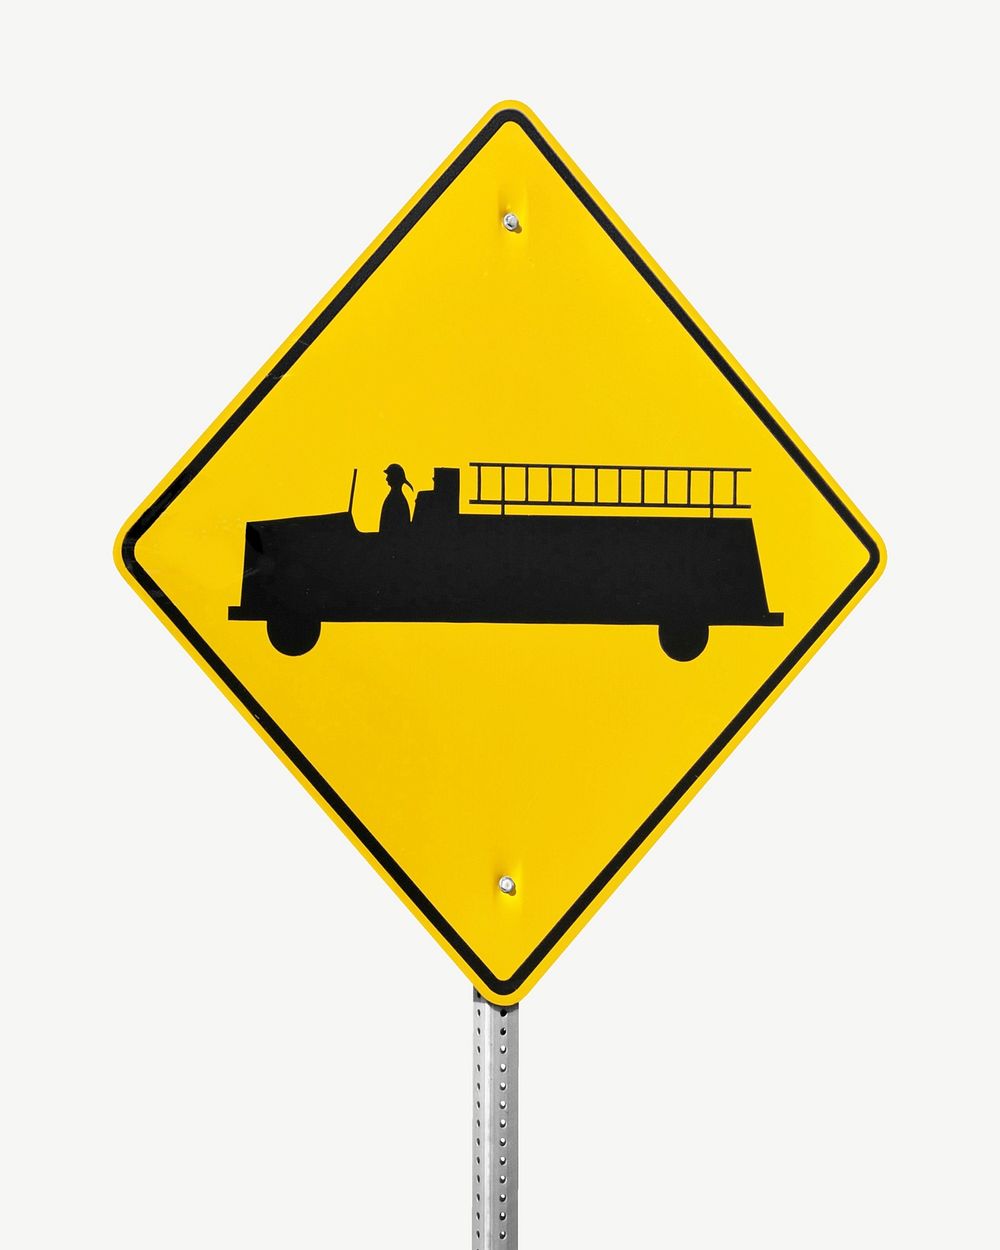 Fire truck ahead road sign collage element psd